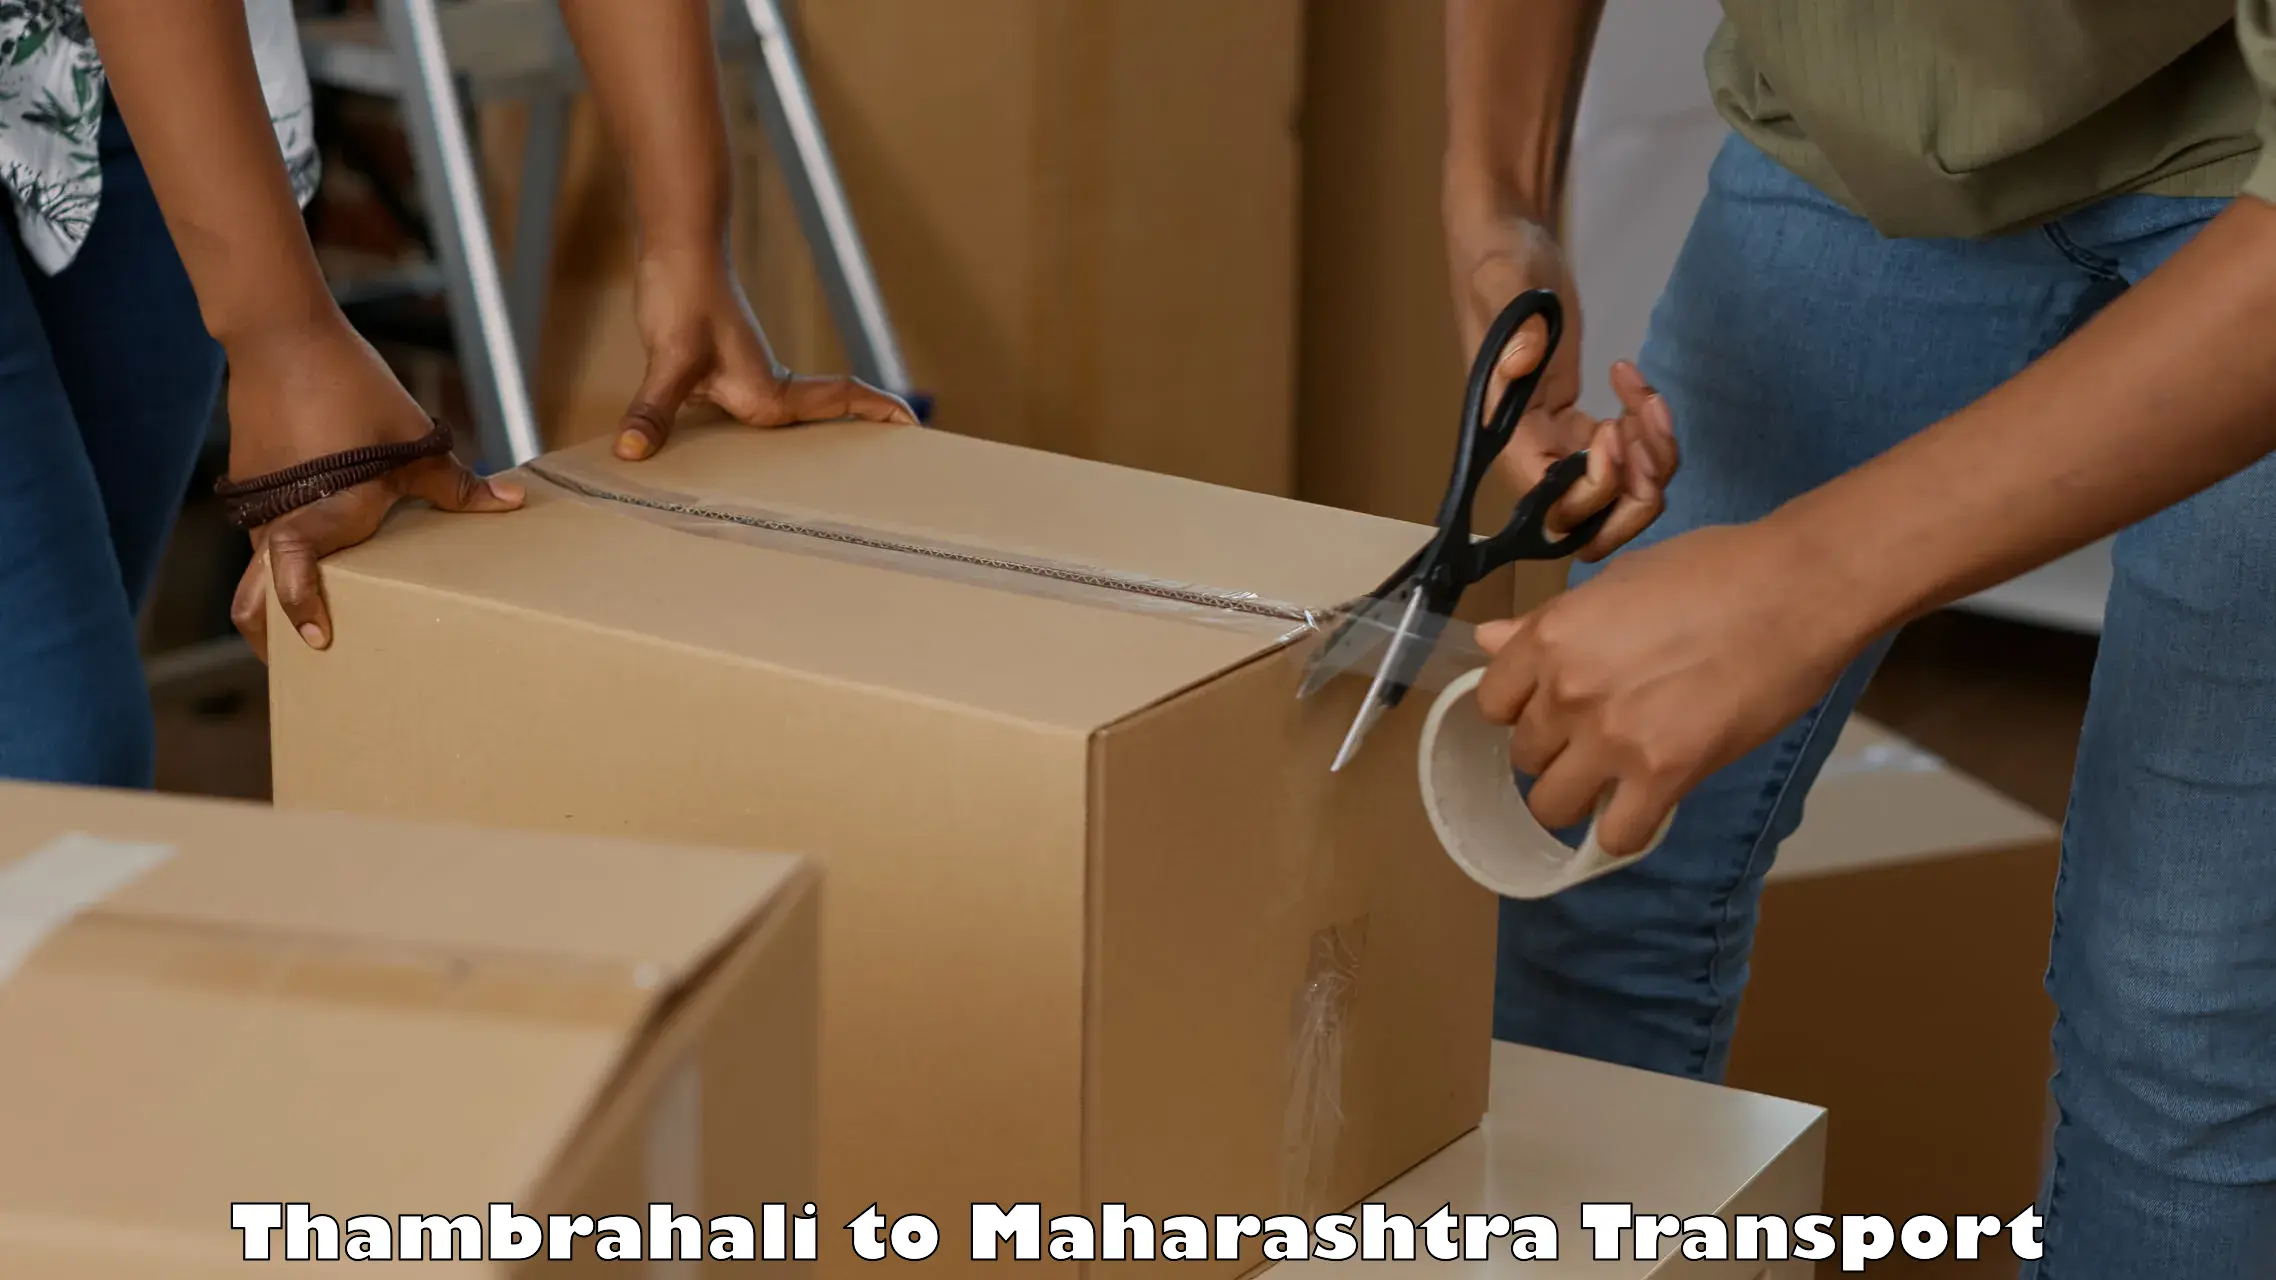 Domestic goods transportation services Thambrahali to Beed